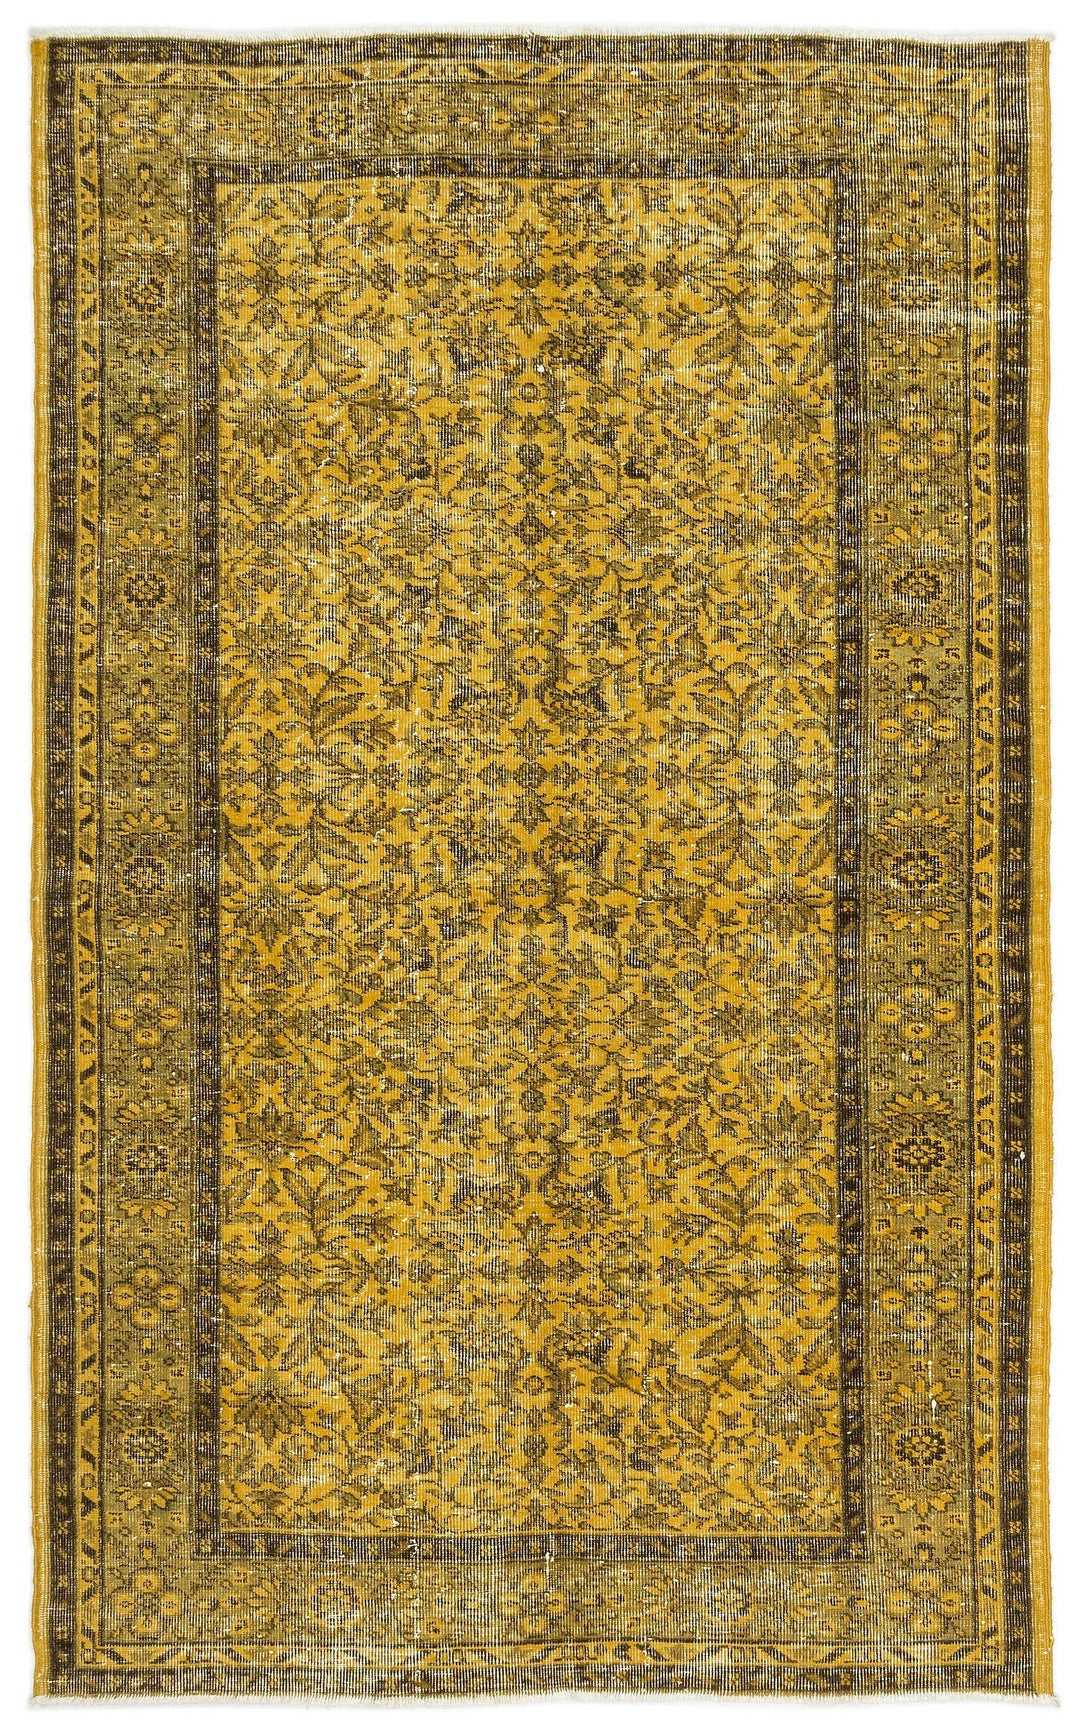 Athens Yellow Tumbled Wool Hand Woven Carpet 141 x 232